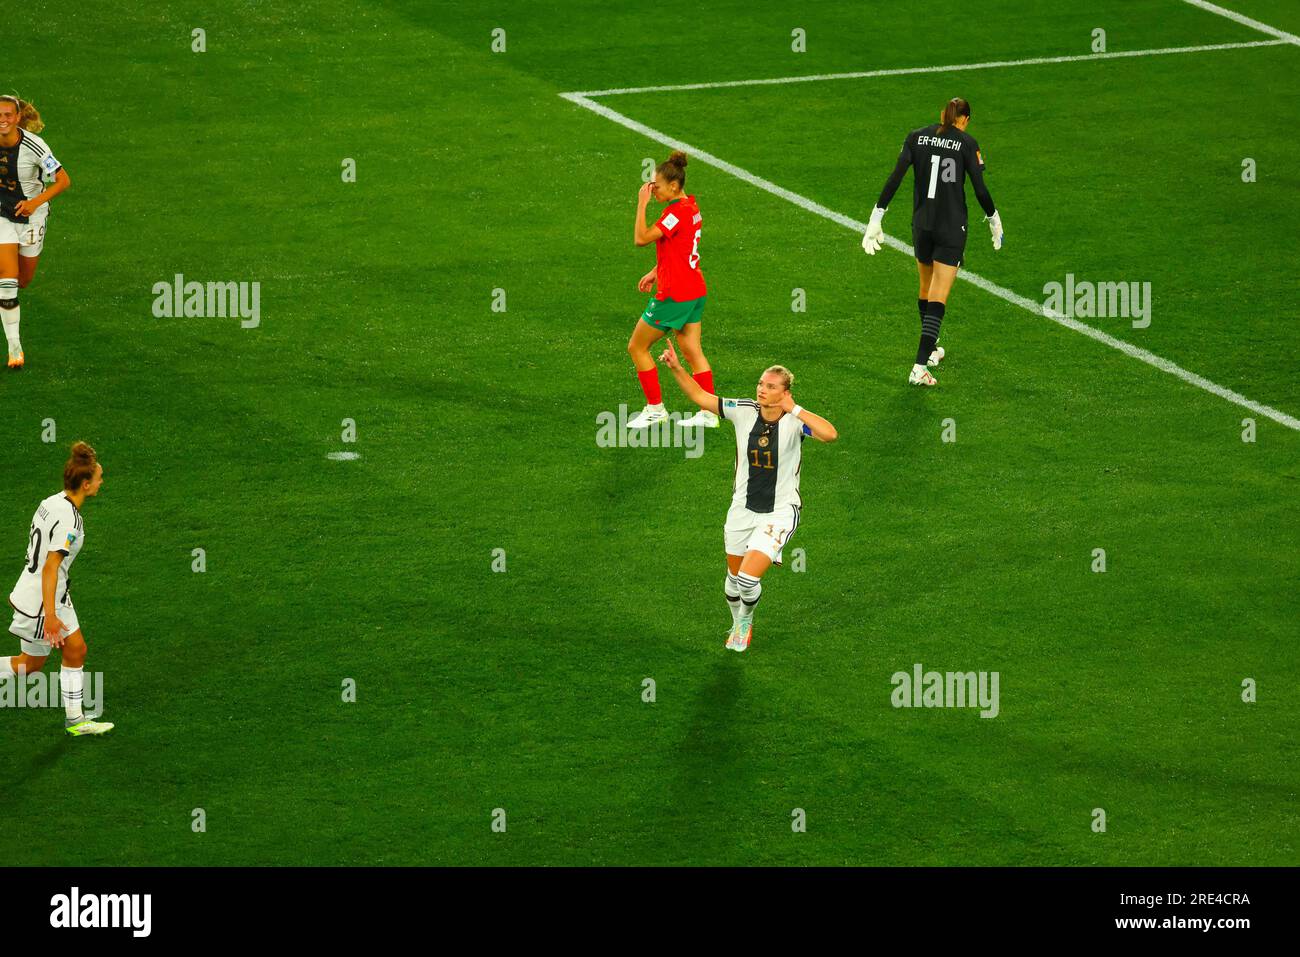 Melbourne, Australia. 24th July, 2023. Alexandra Popp-Hoppe (R) of Germany celebrates a goal during the FIFA Women's World Cup Australia & New Zealand 2023 Group match between Germany and Morocco at Melbourne Rectangular Stadium. Germany won the game 6-0. (Photo by George Hitchens/SOPA Images/Sipa USA) Credit: Sipa USA/Alamy Live News Stock Photo